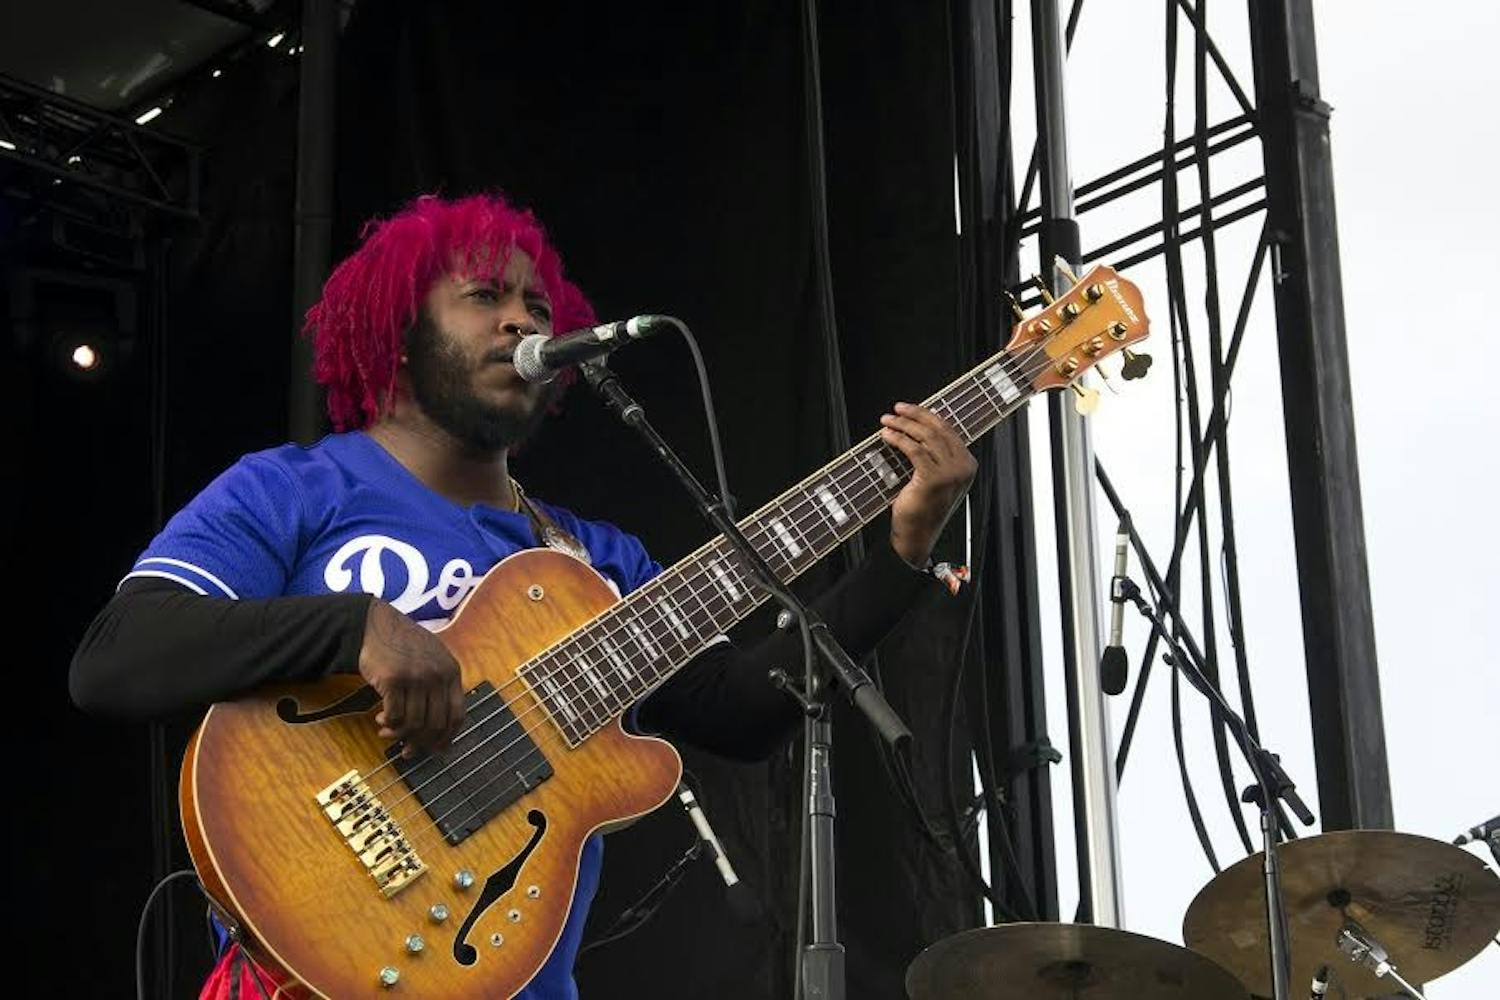 Thundercat, a Grammy-award winning bassist, performed at Field Trip in Toronto this past weekend. Thundercat wooed fans with charming performances like "A Fan's Mail (Tron Song Suite II)" and heavy cuts like "Them Changes" from his album Drunk.&nbsp;